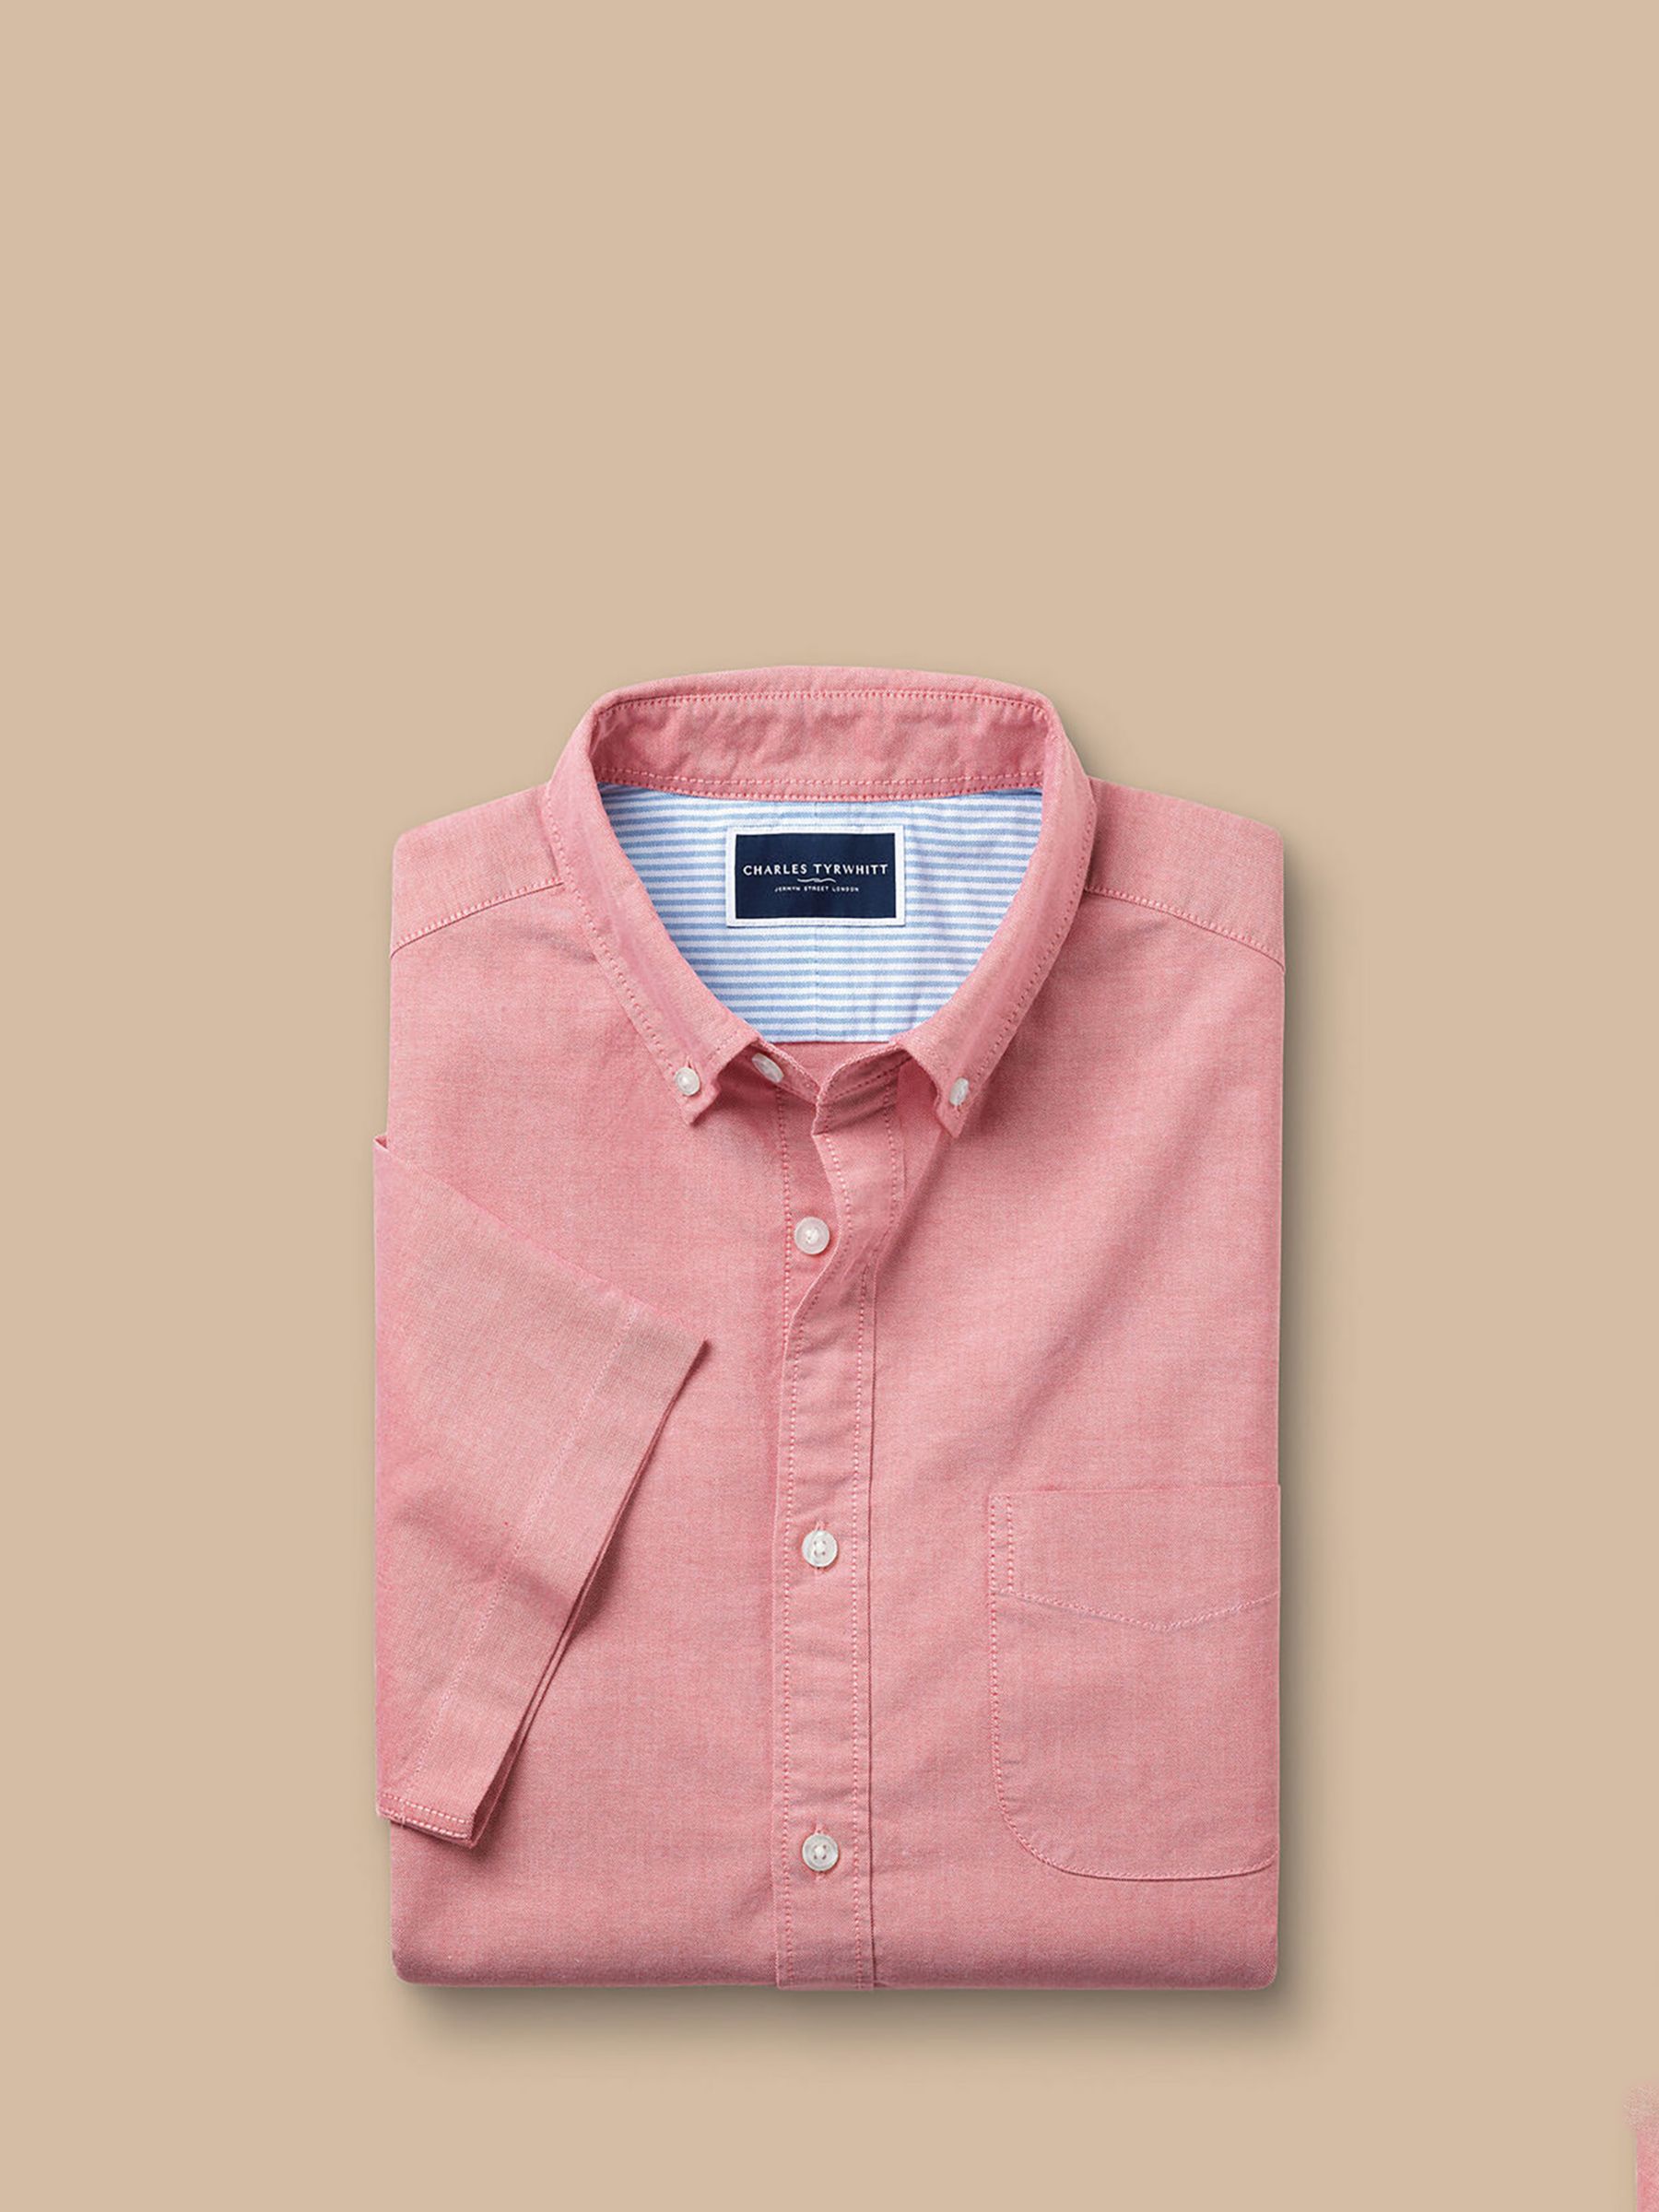 Buy Charles Tyrwhitt Plain Short Sleeve Button Down Stretch Washed Oxford Shirt, Coral Pink Online at johnlewis.com